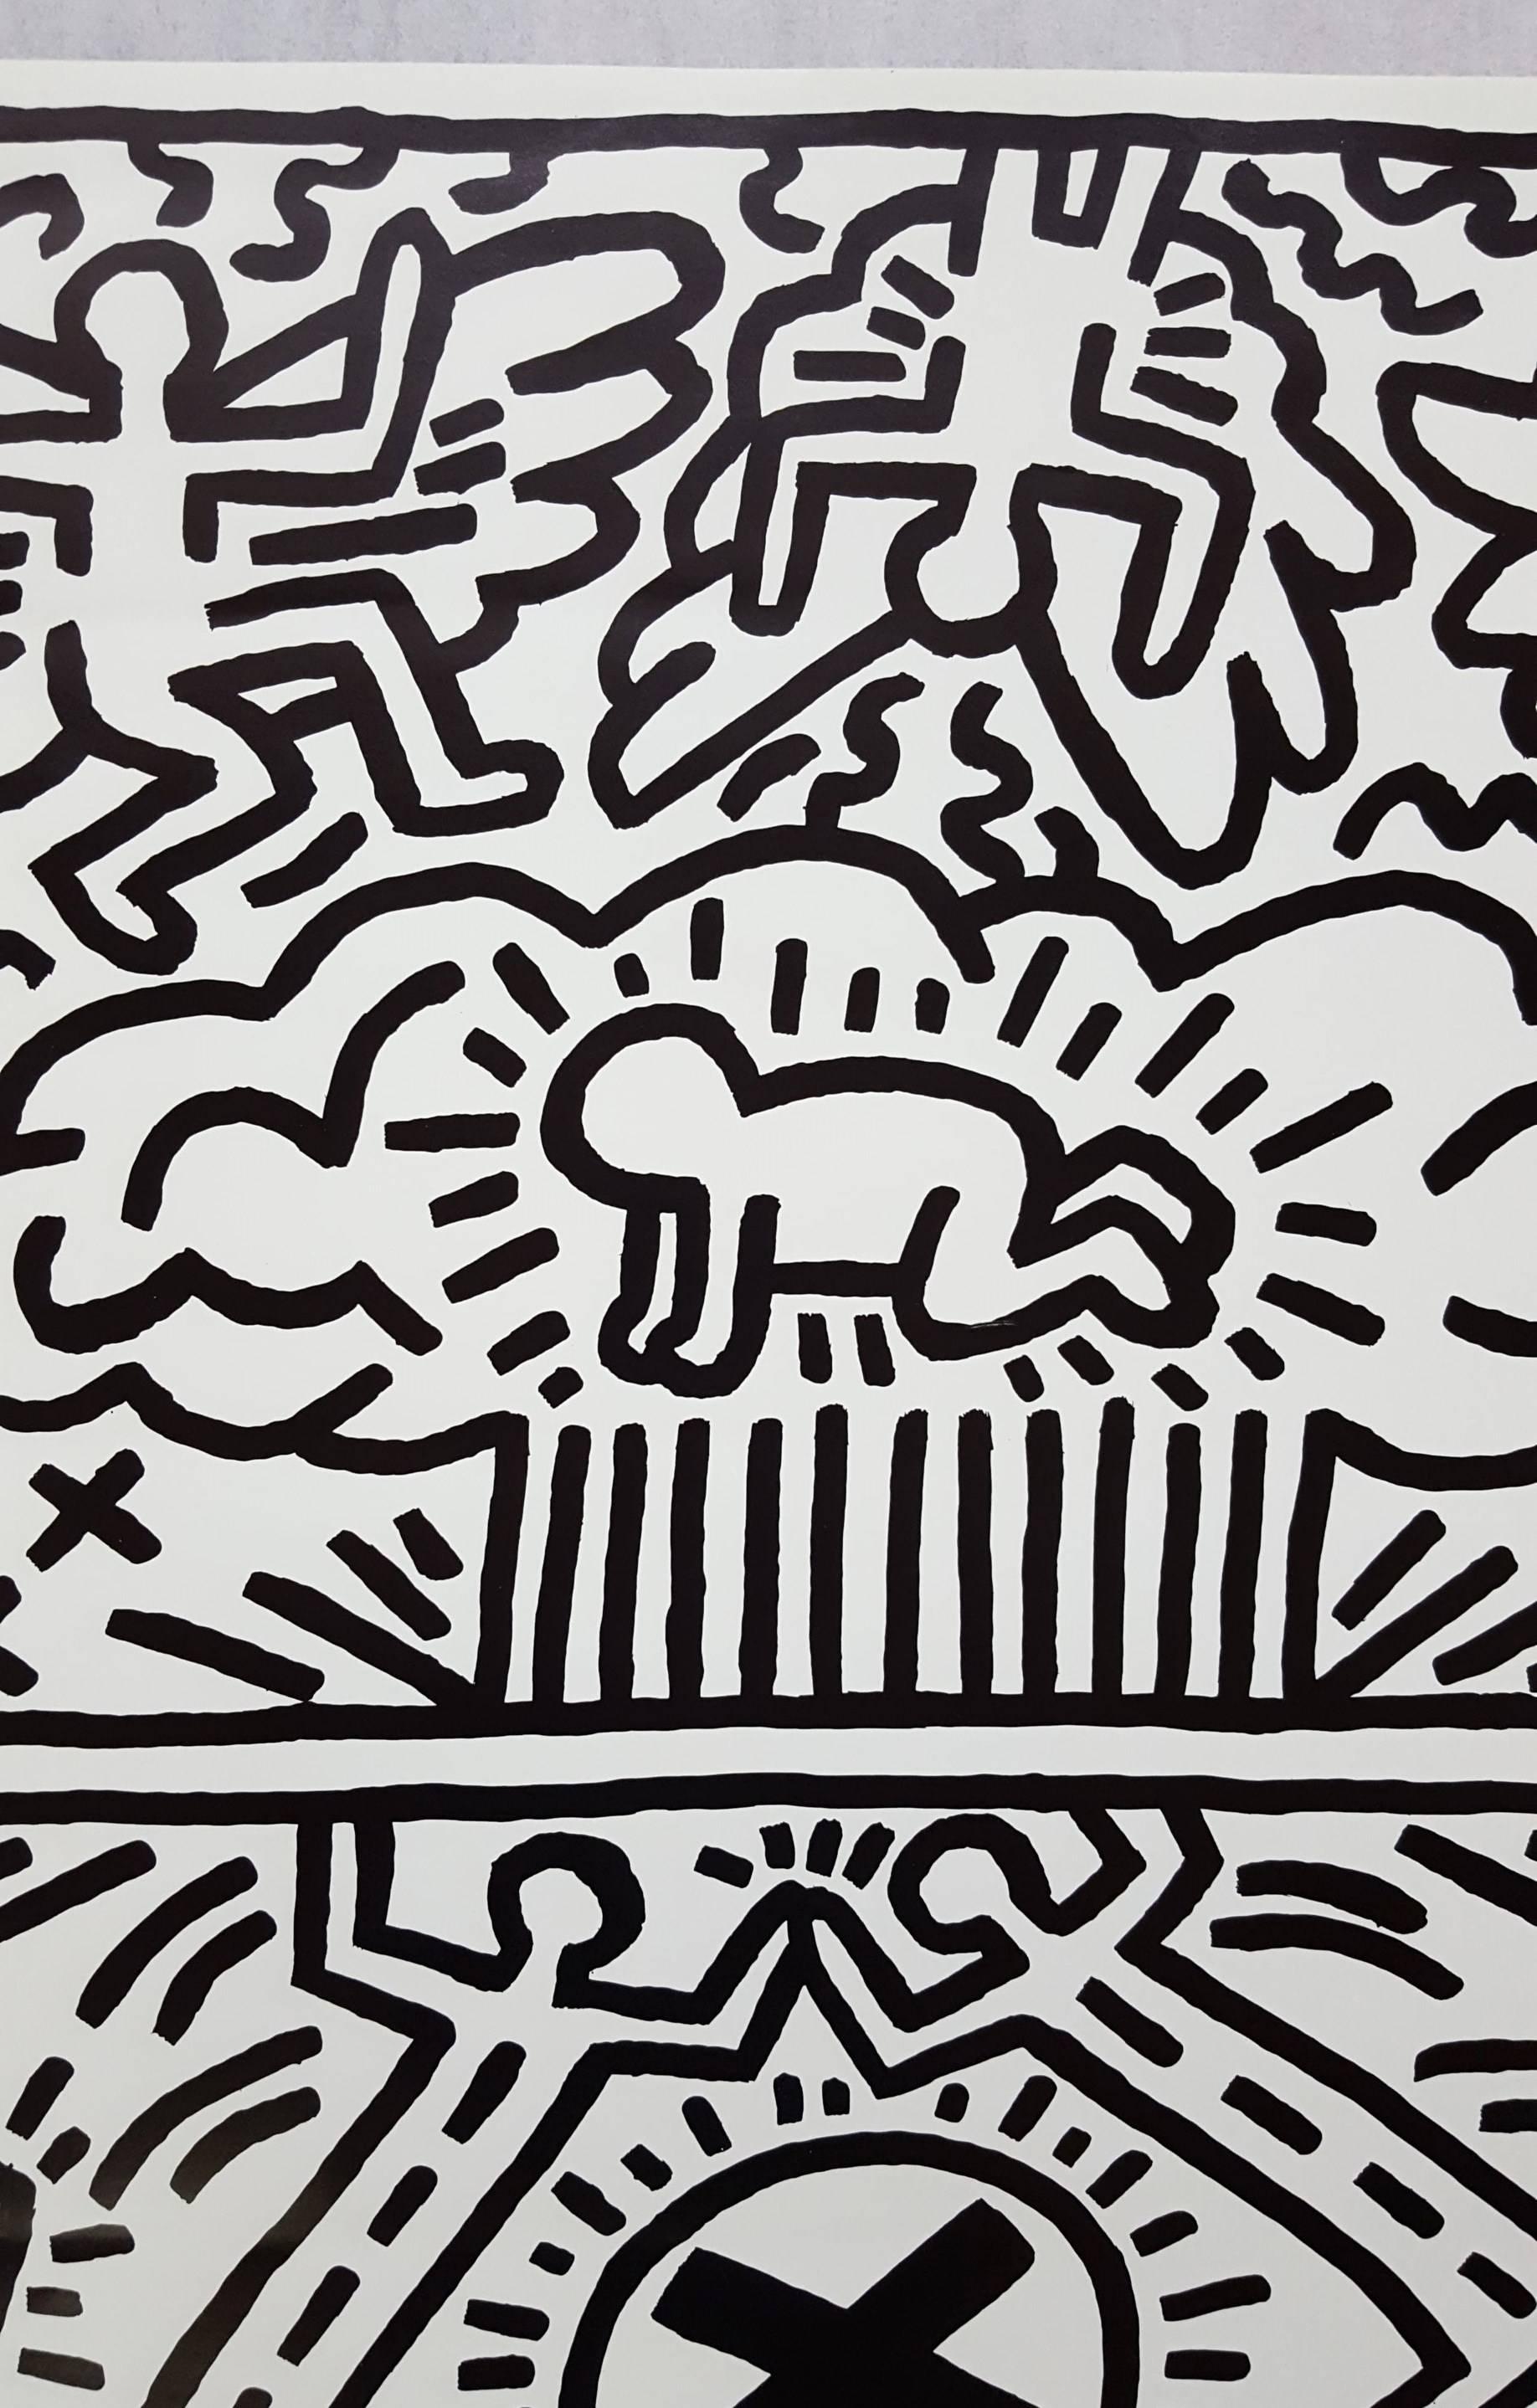 Poster for Nuclear Disarmament - Pop Art Print by Keith Haring